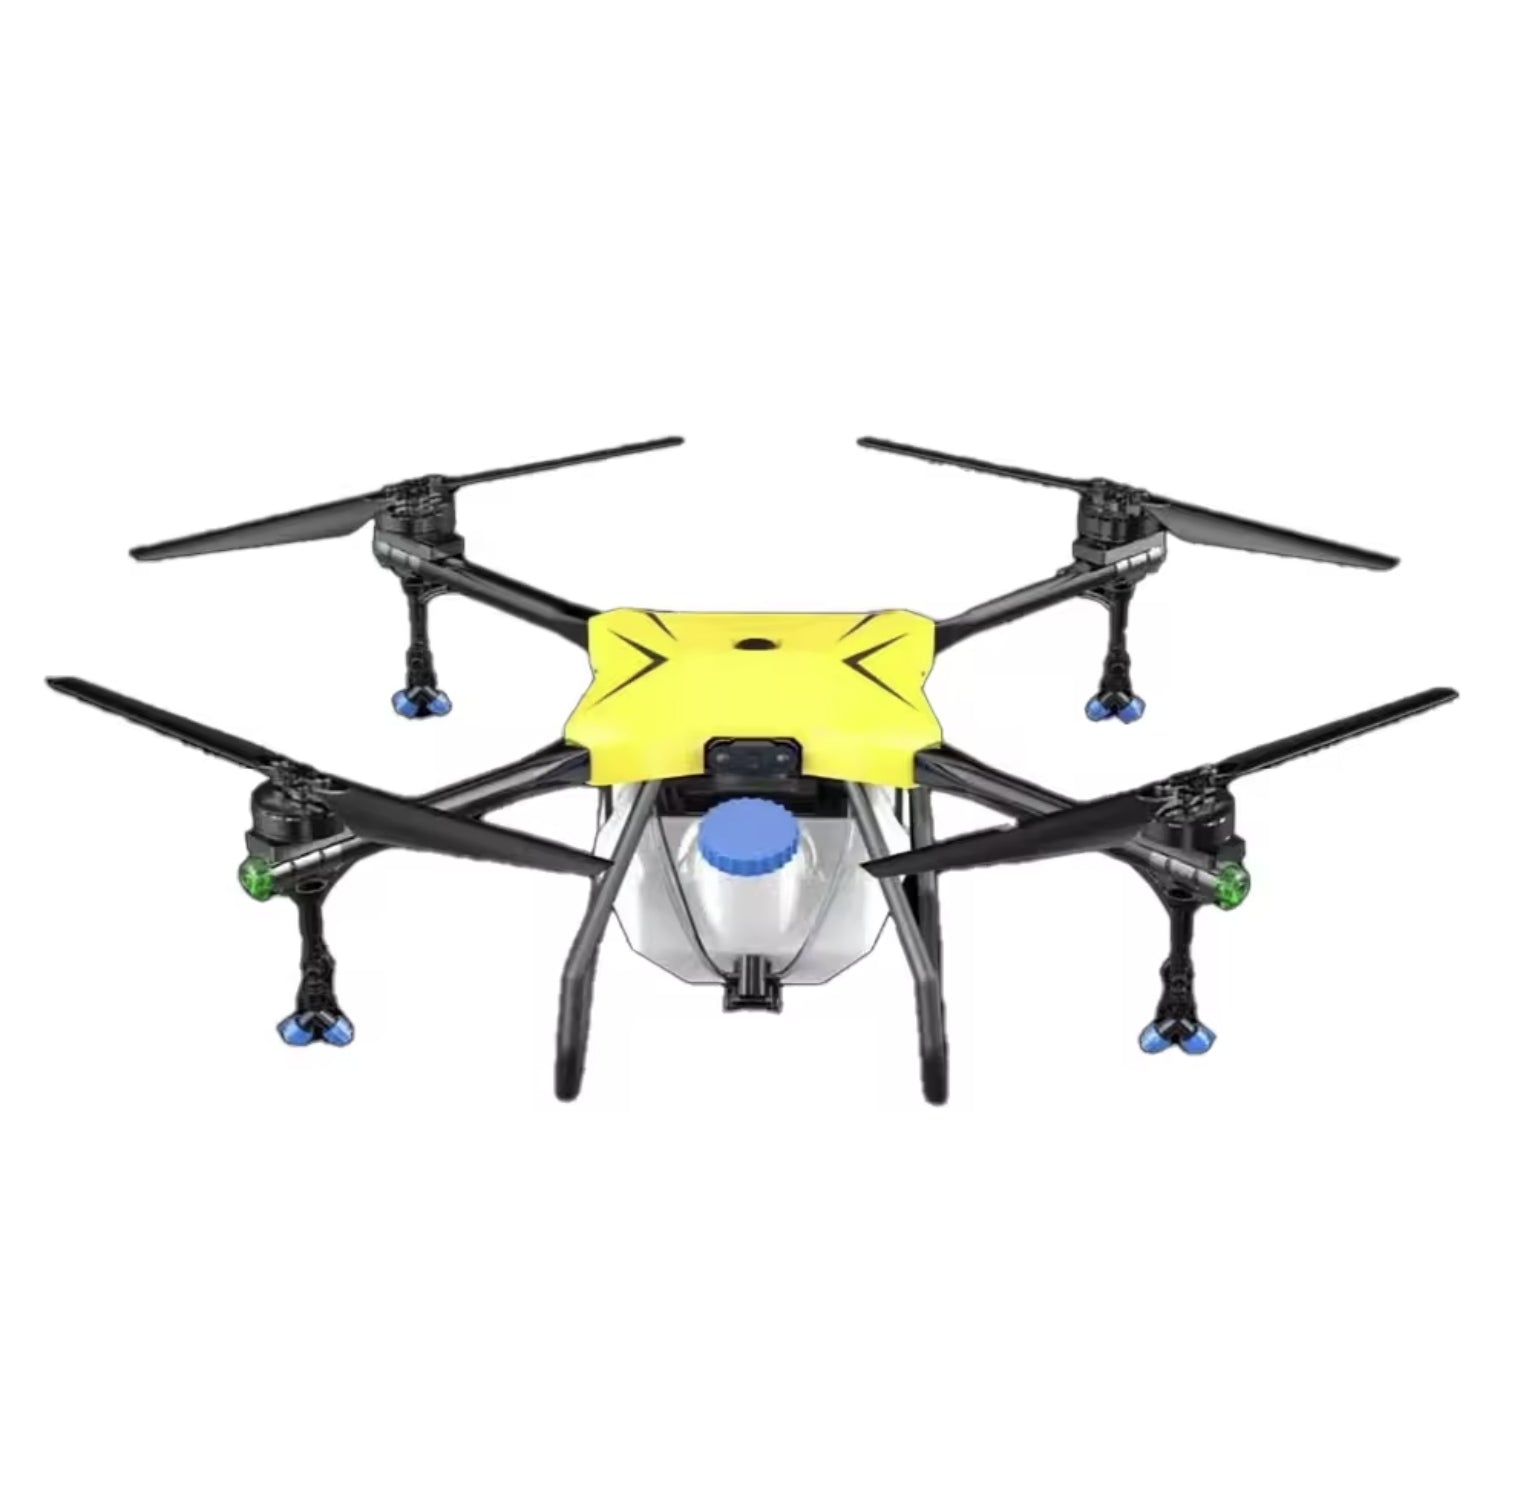 H60-4 Agricultural Drone - 4 Axis 30L Sprayer Water Tank / 30KG Spreader 14S 28000mAh Battery